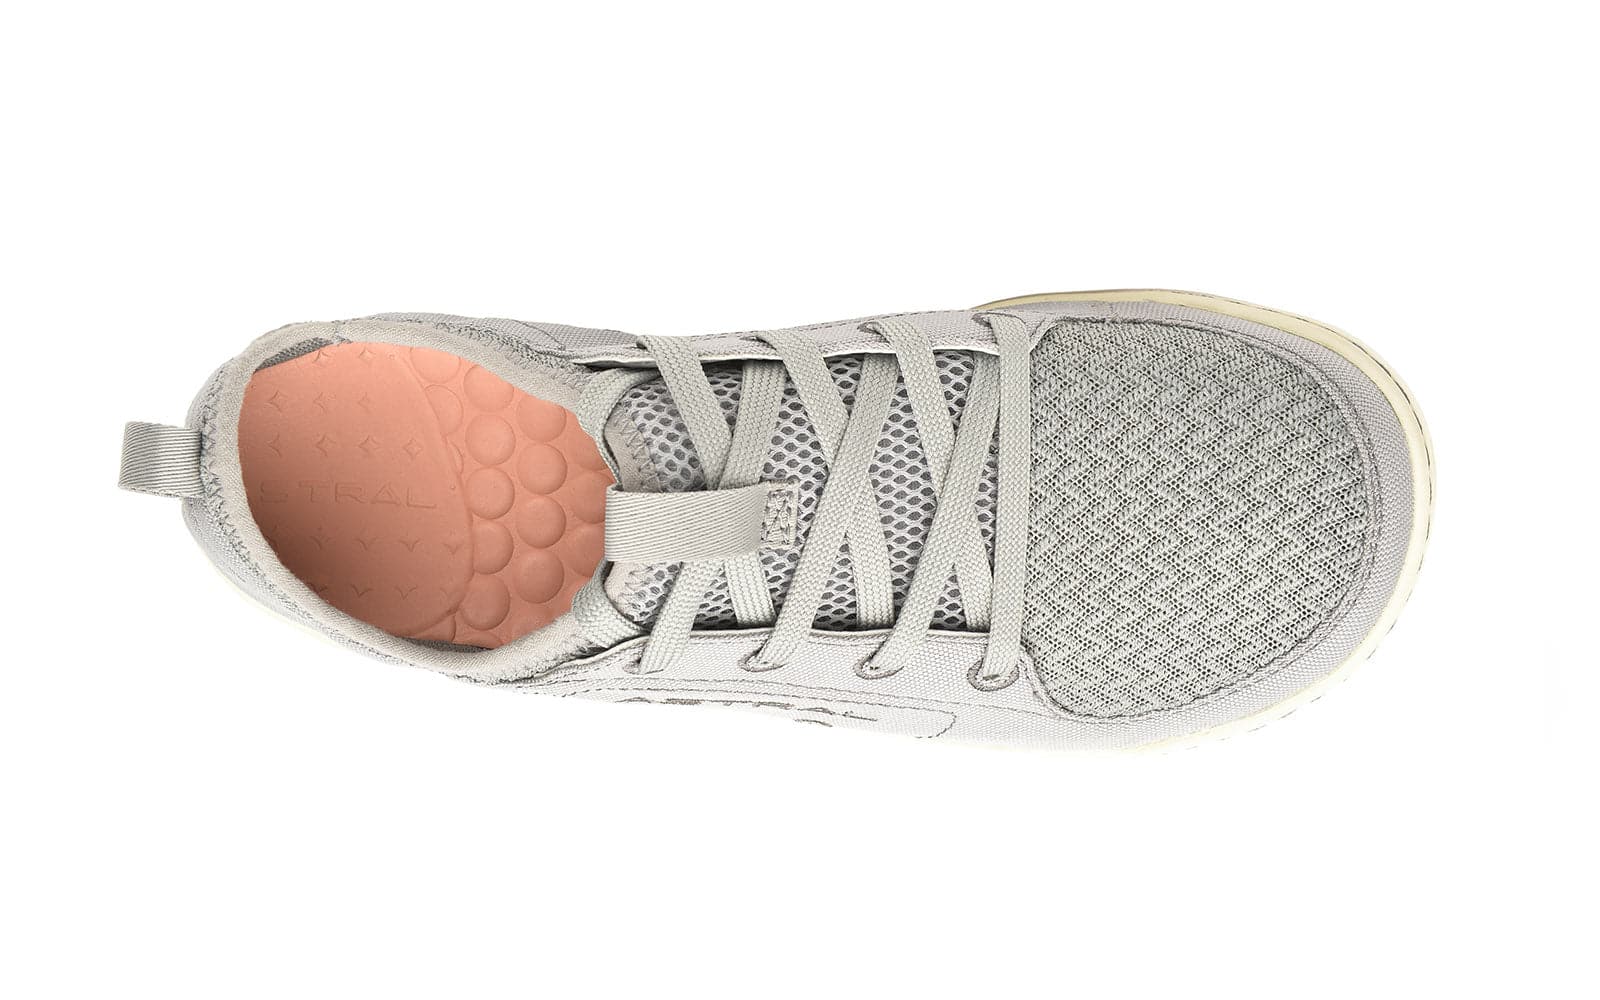 Featuring the Loyak - Women's women's footwear manufactured by Astral shown here from a third angle.